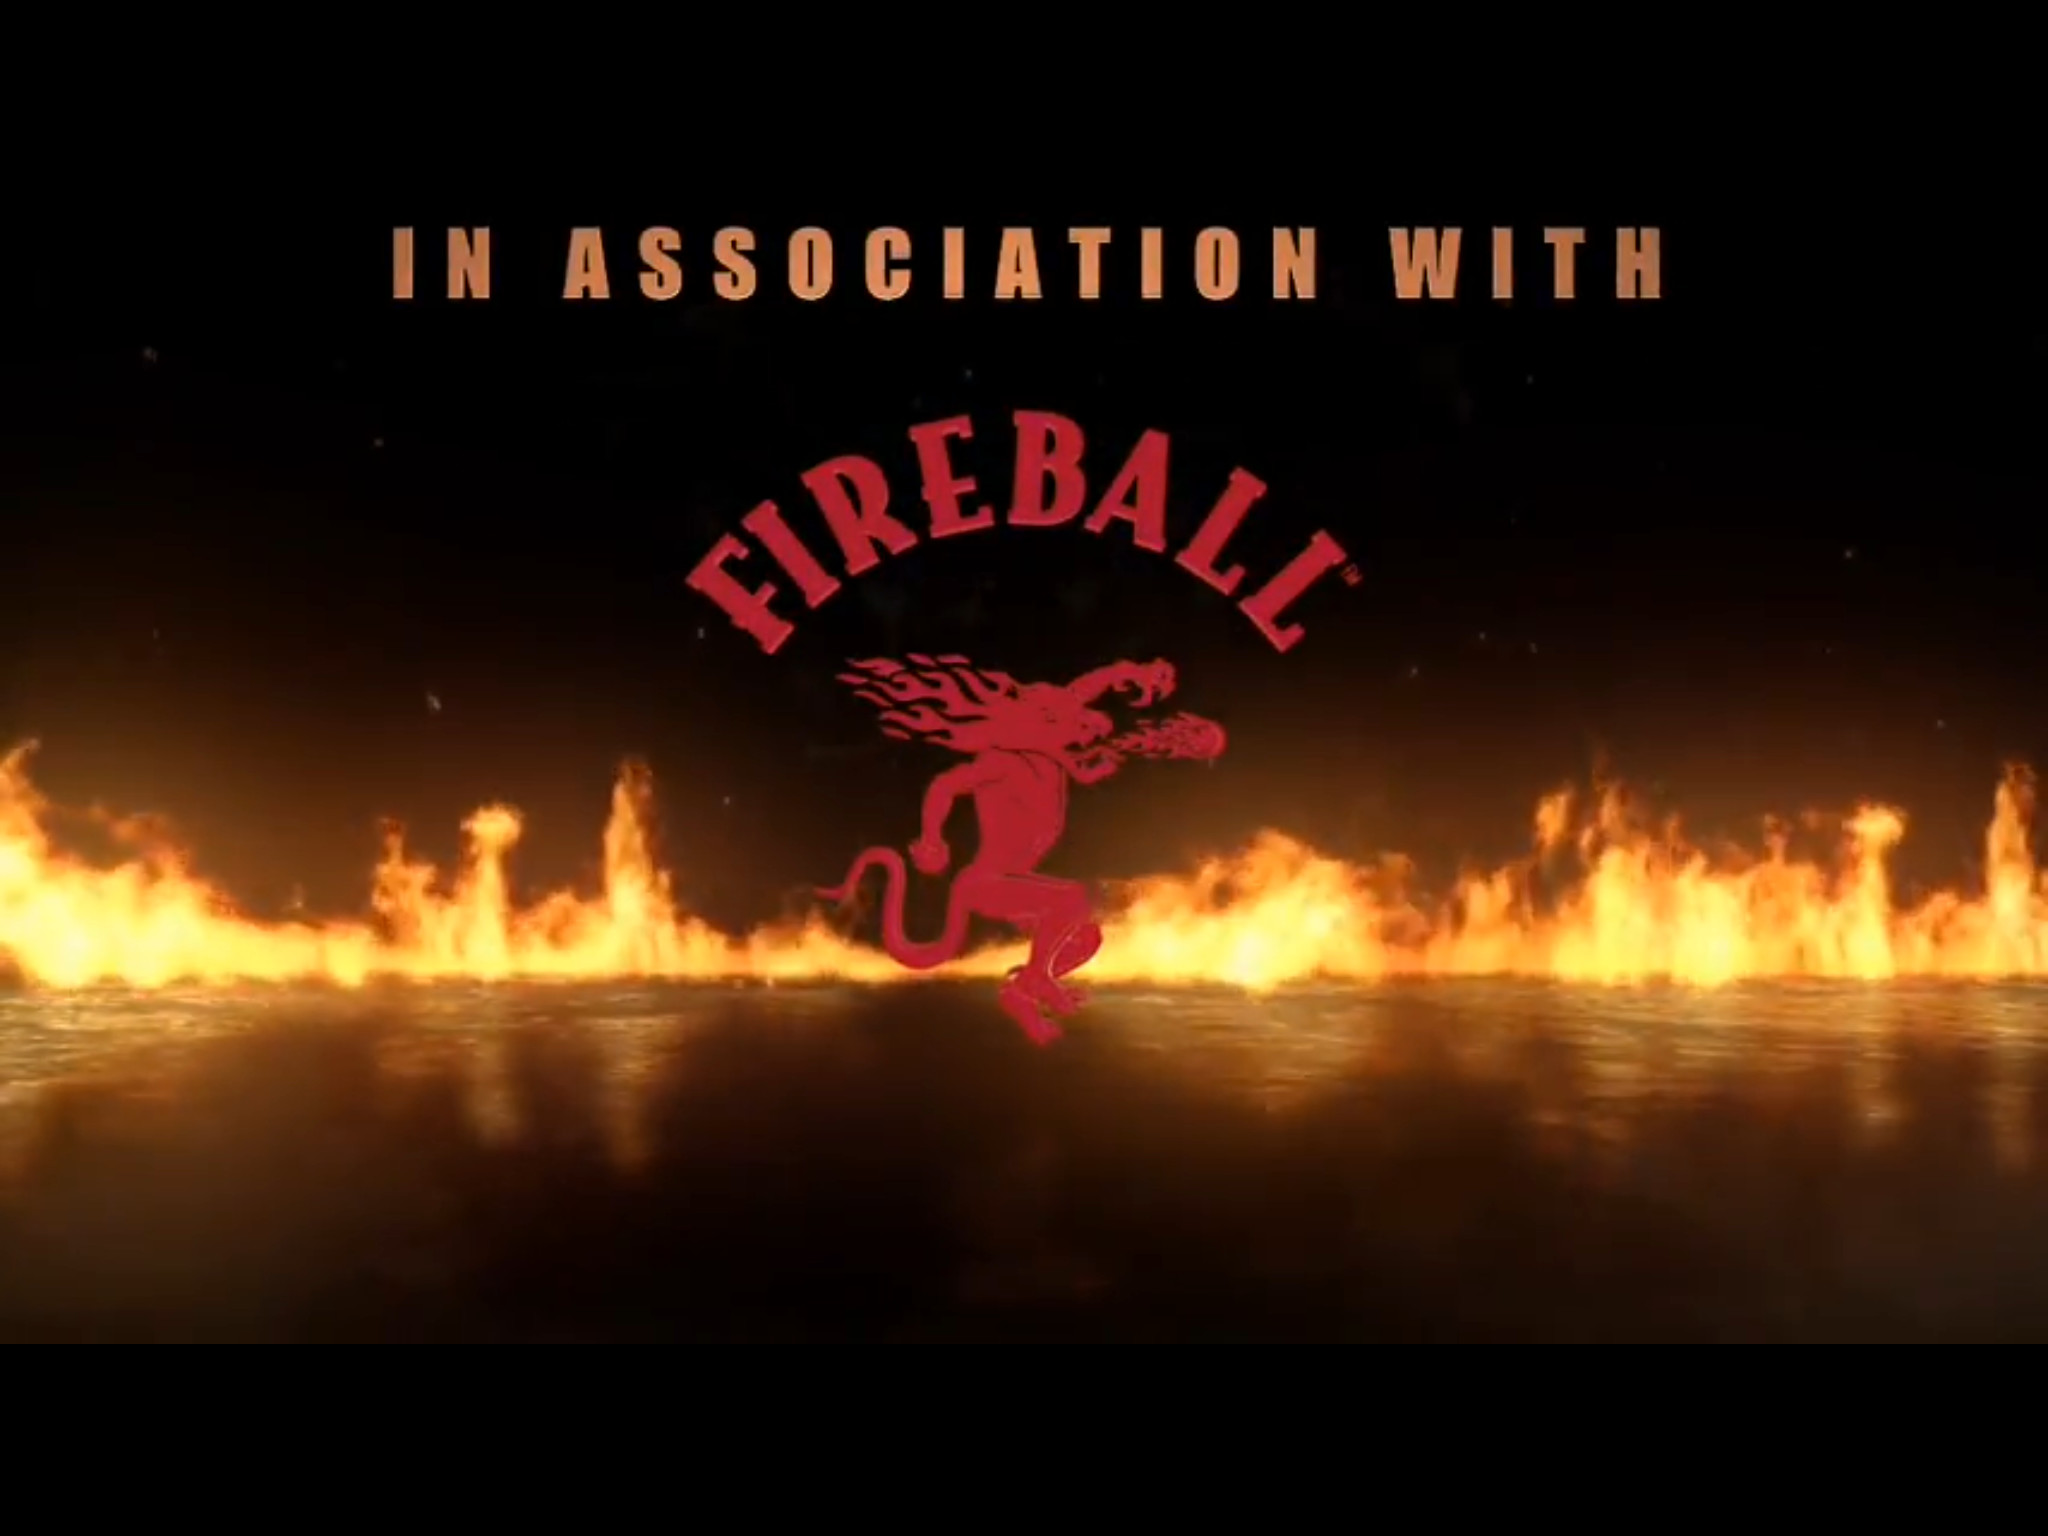 Sunday in association with Fireball Whisky